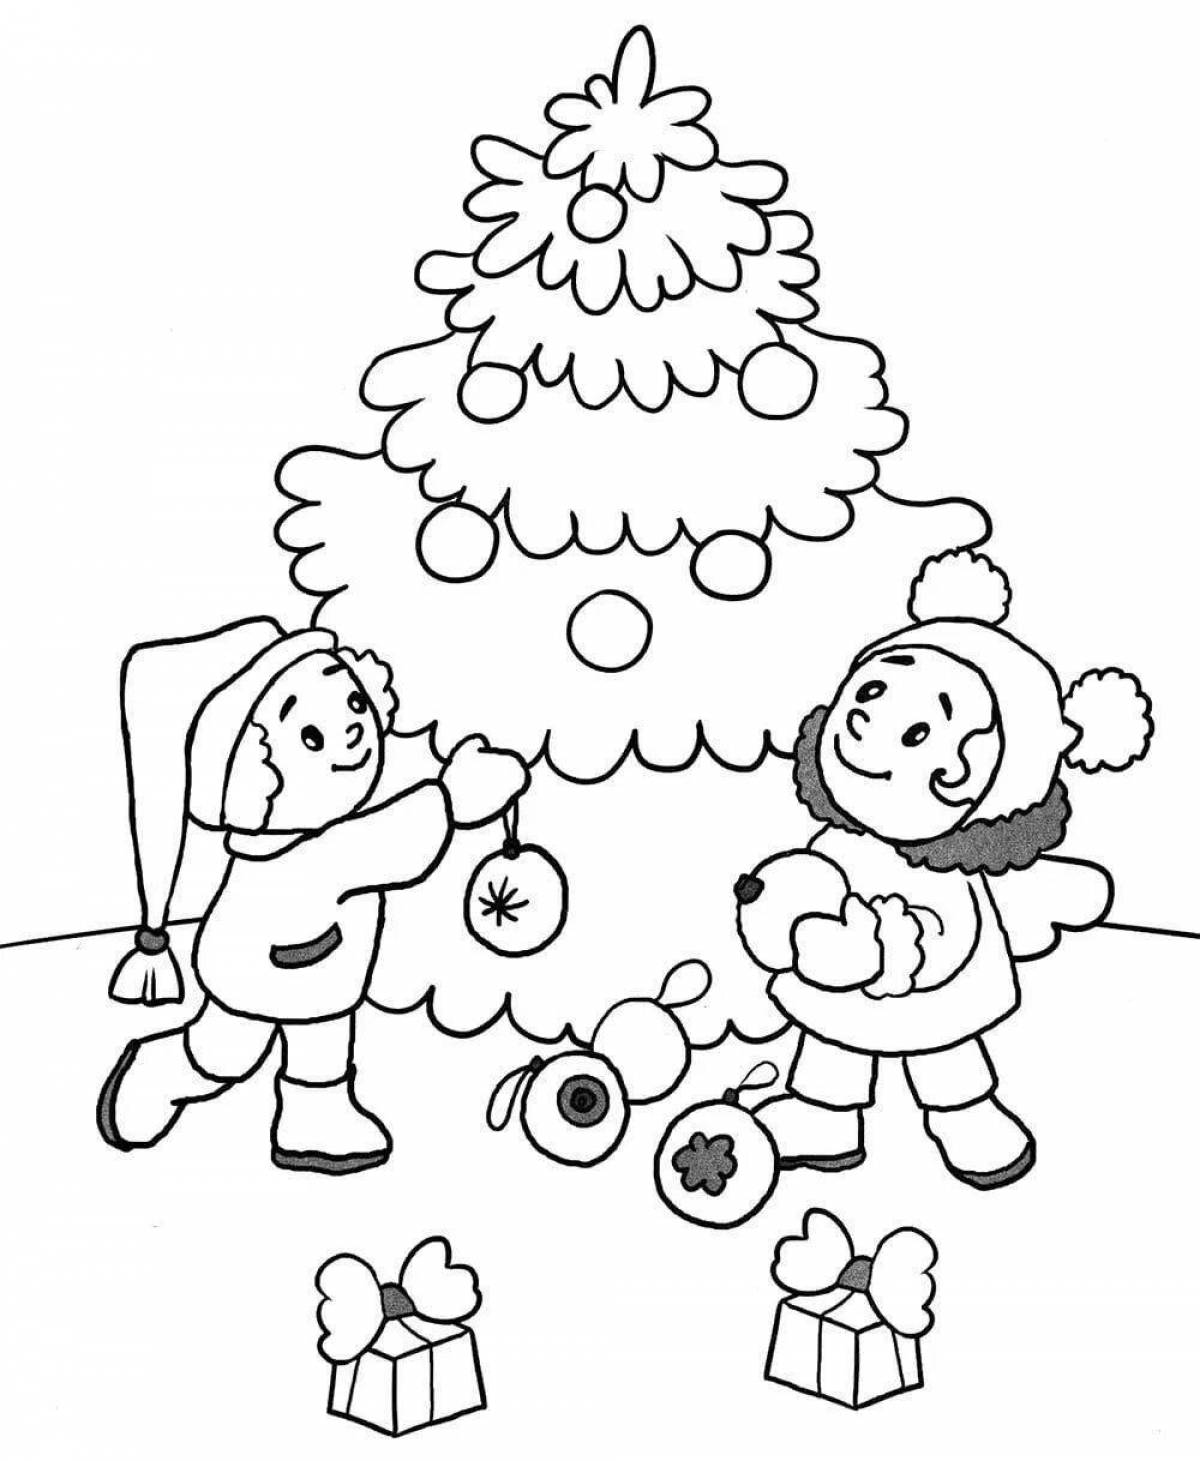 Colorful bright Christmas coloring book